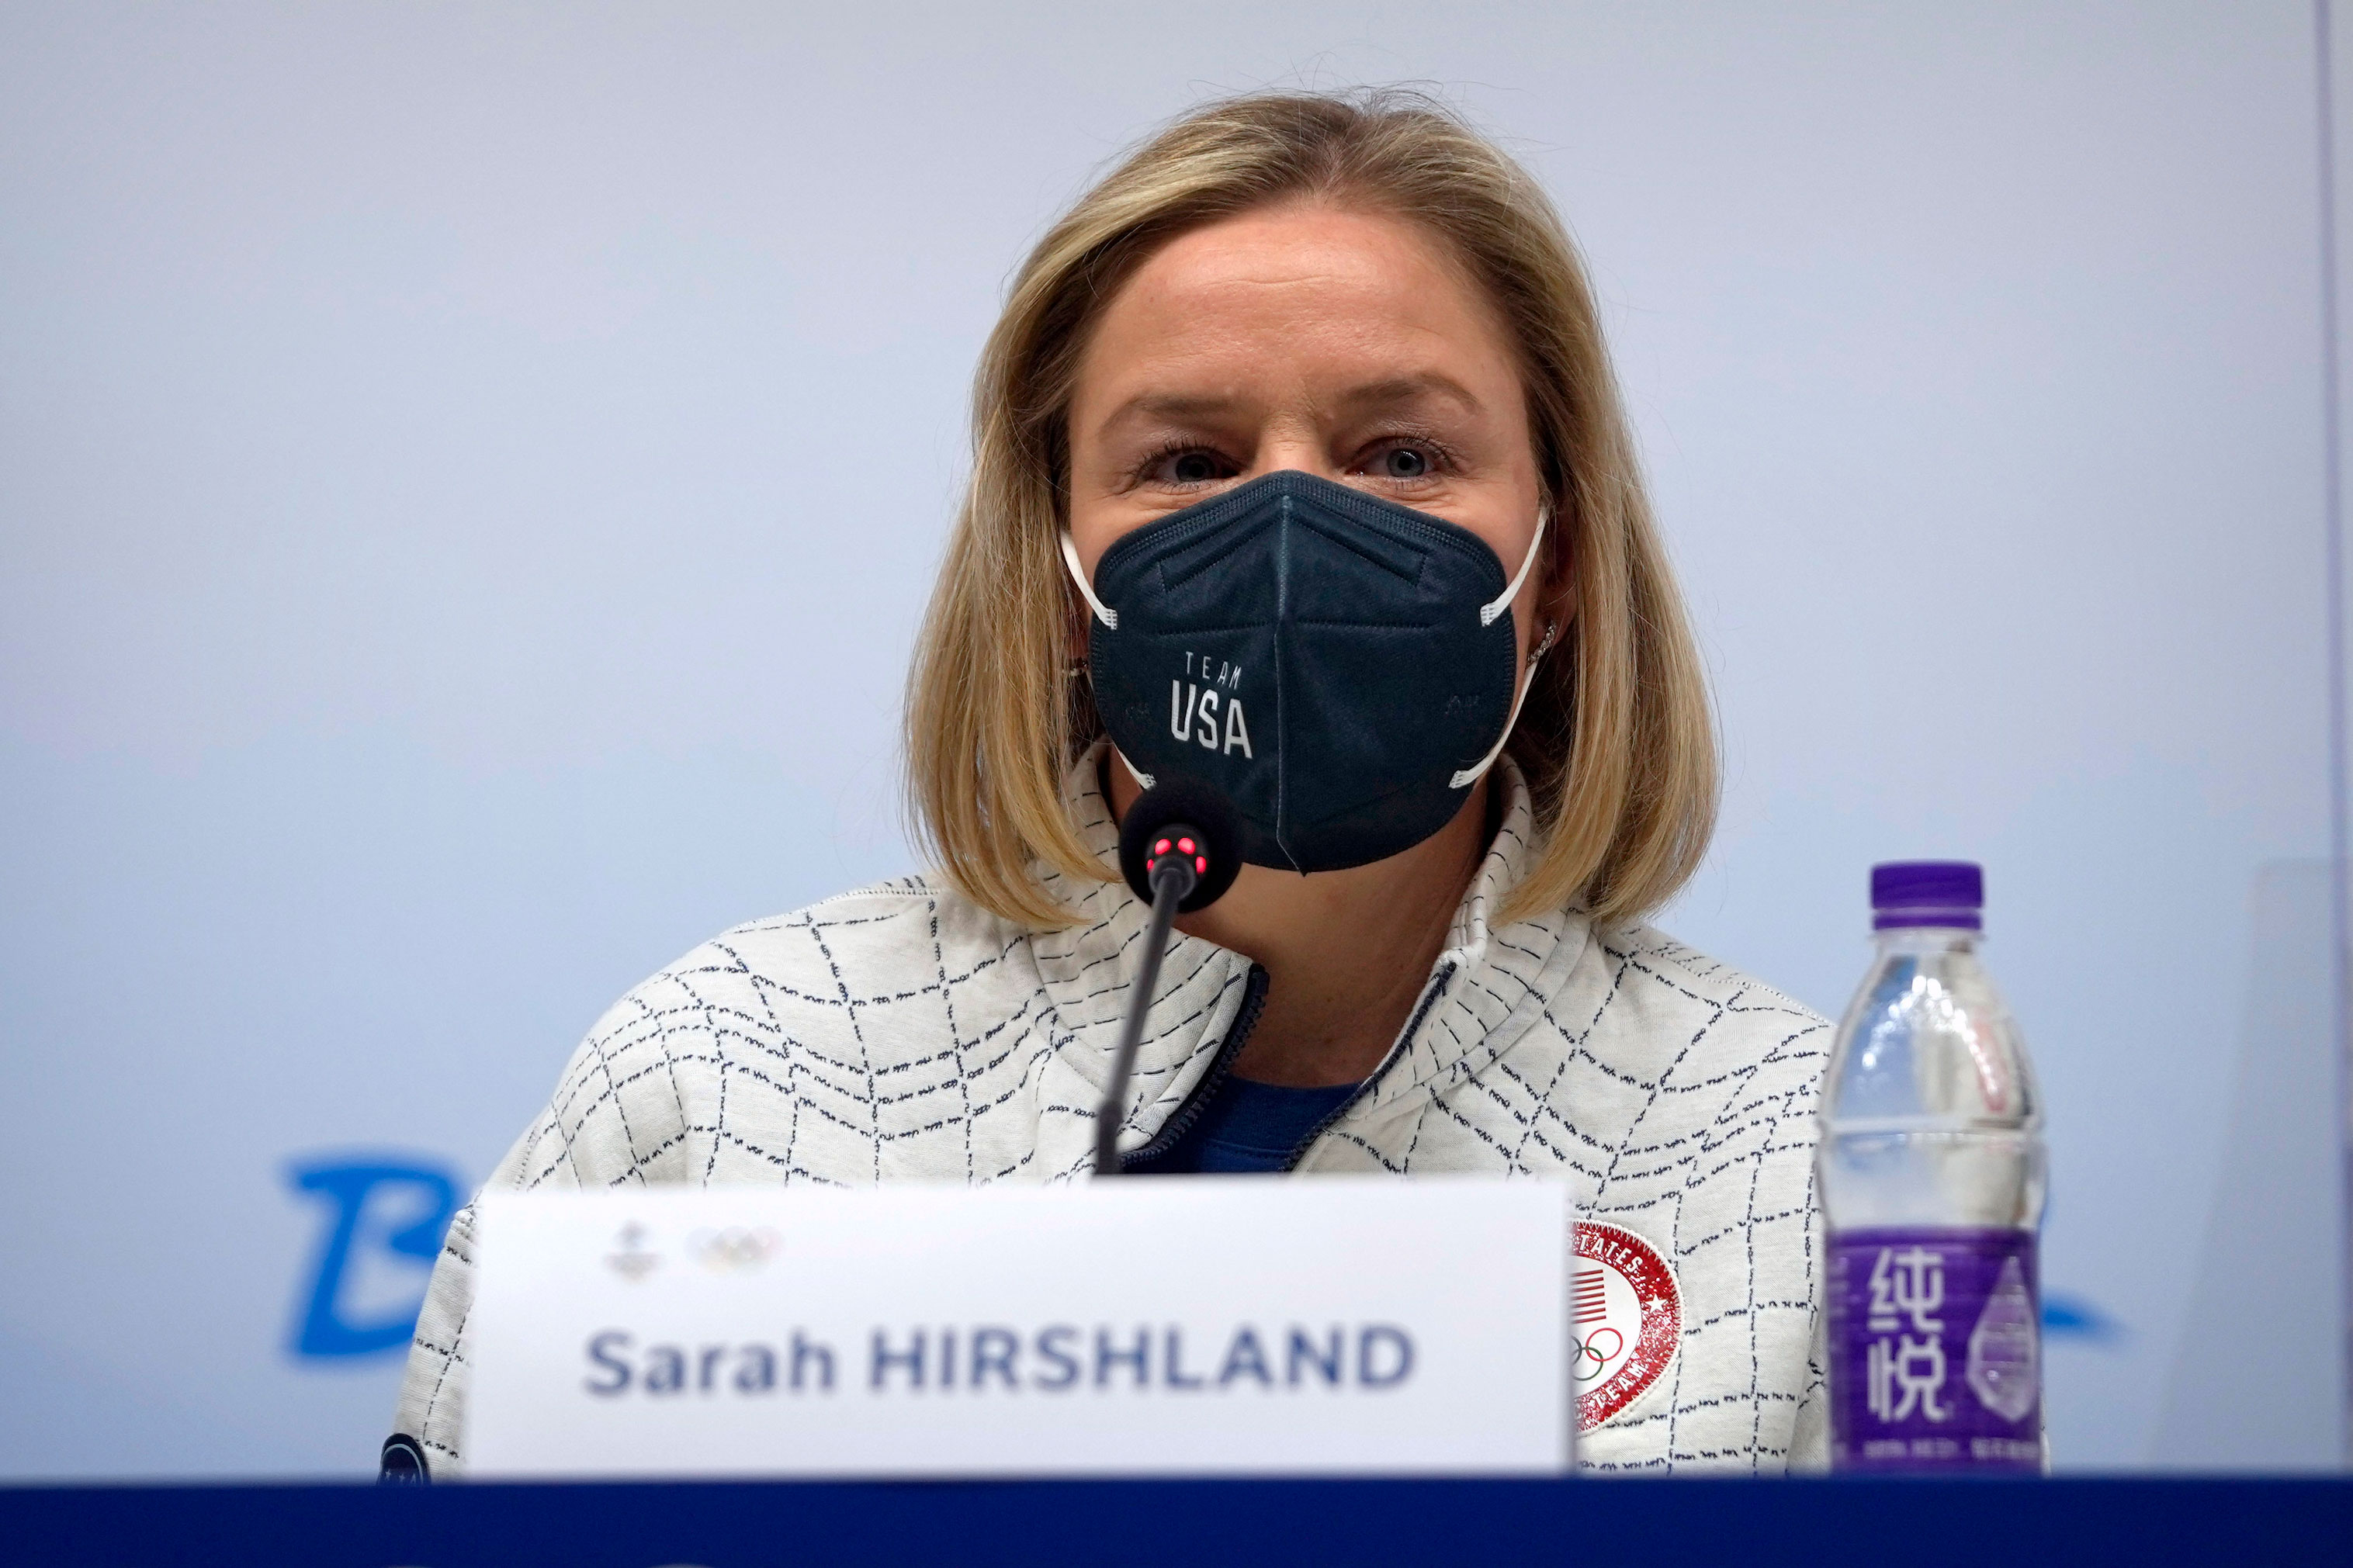 United States Olympic and Paralympic Committee CEO Sarah Hirshland speaks during a press conference at the 2022 Winter Olympics on Feb. 4.